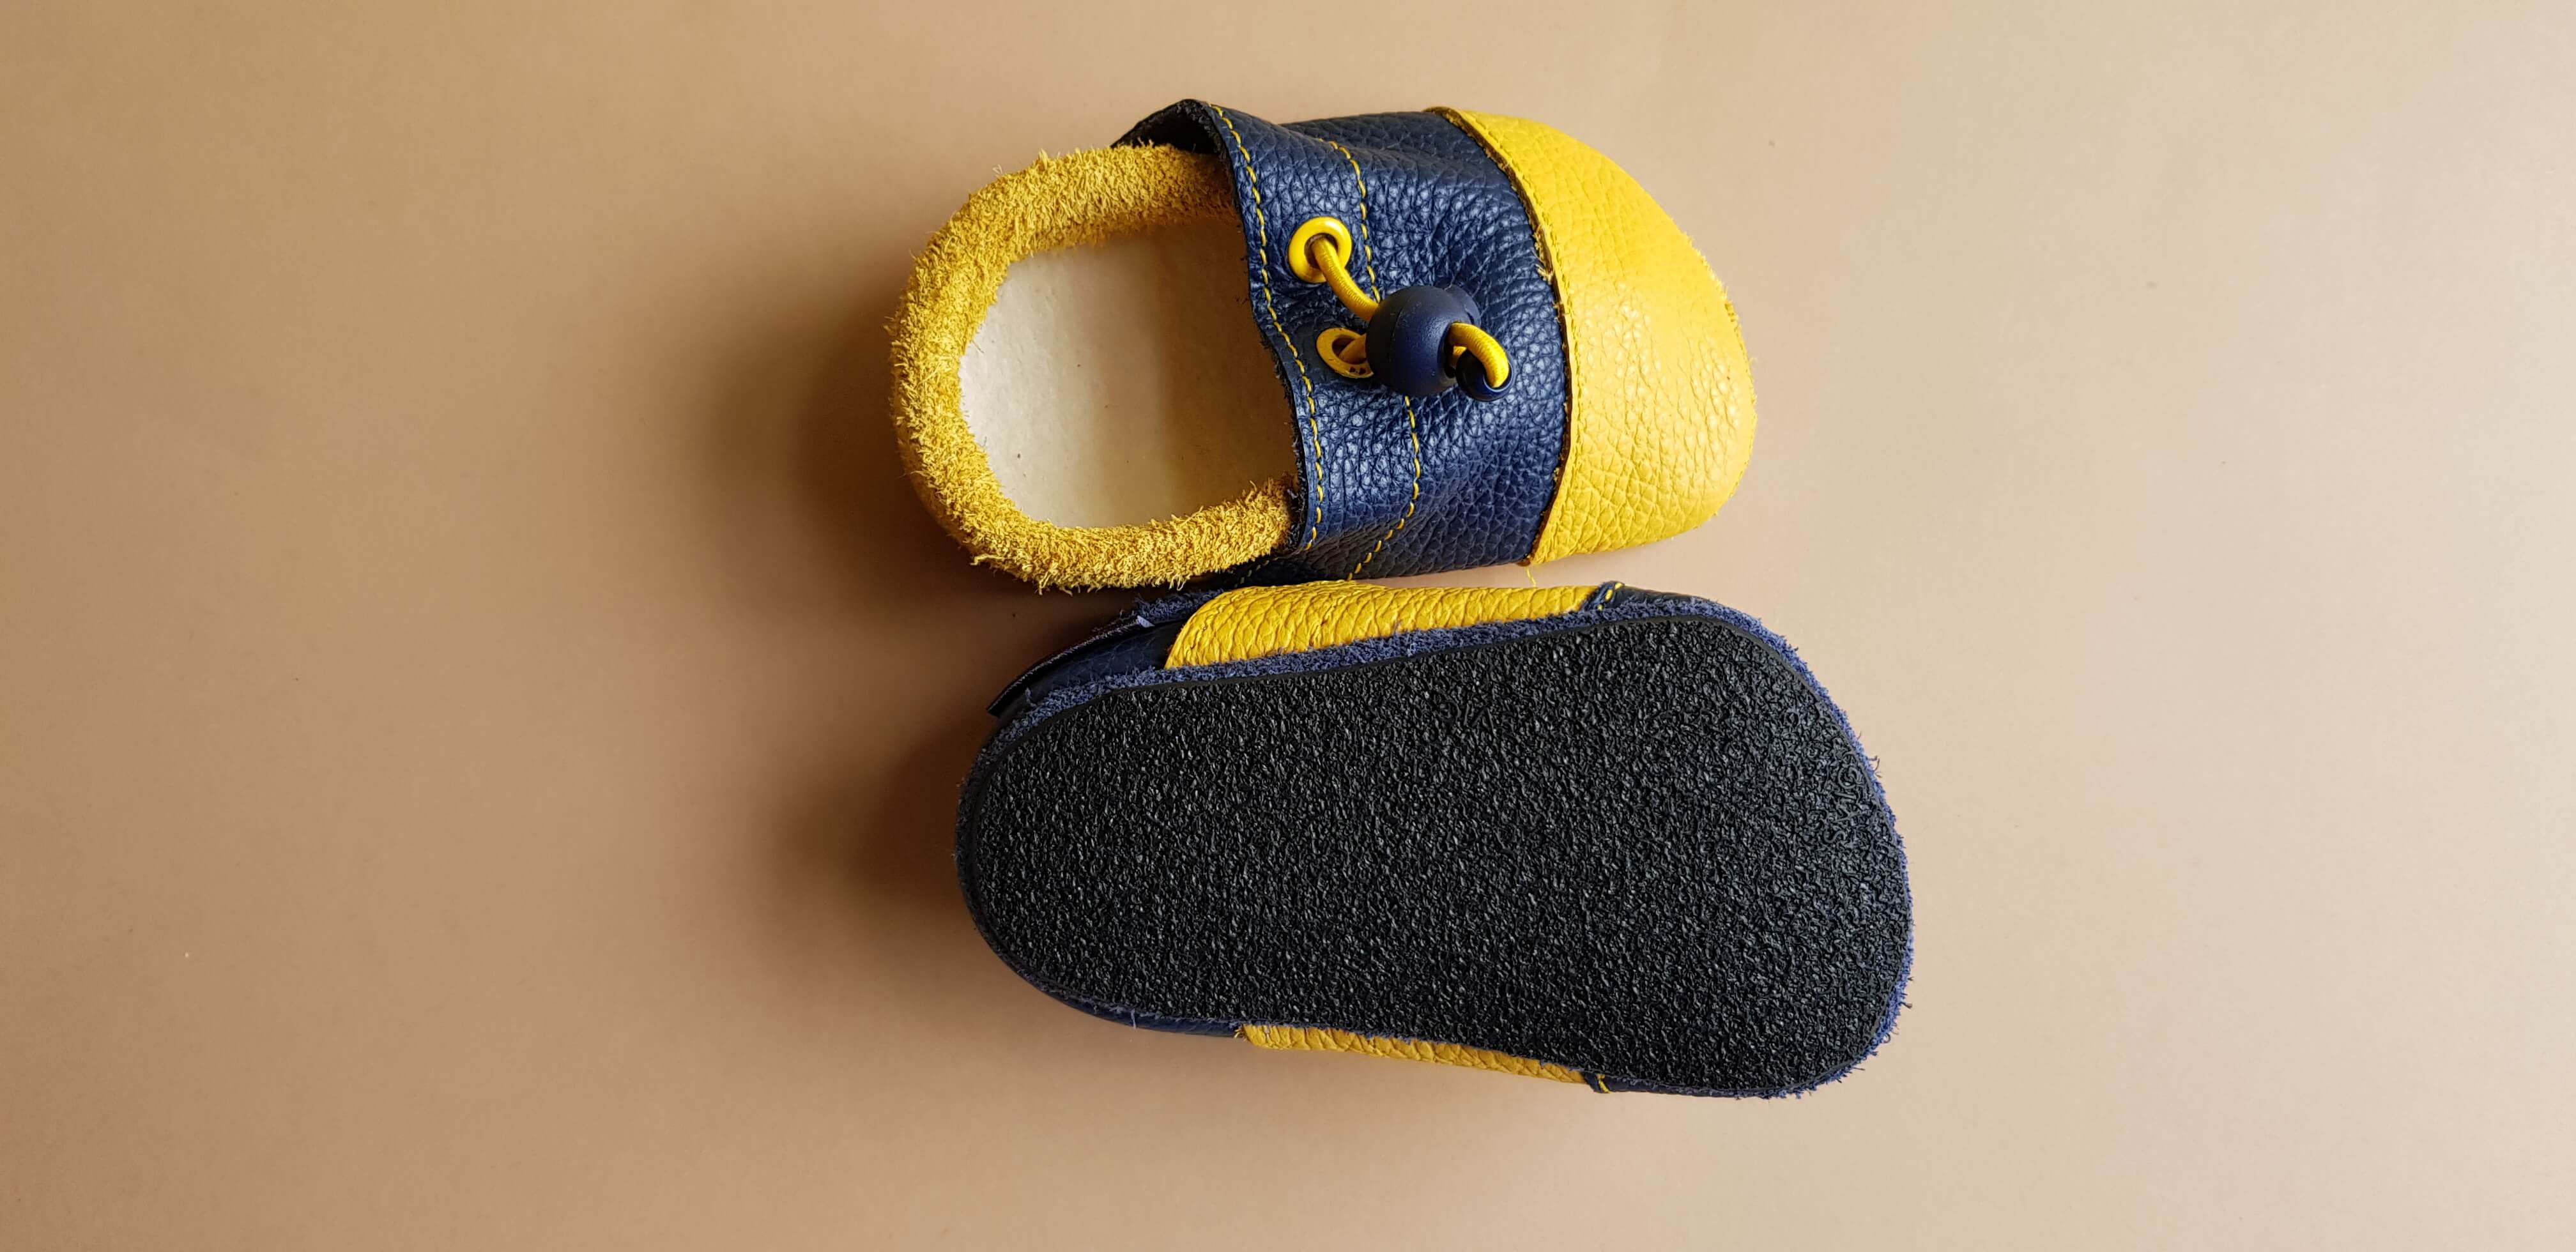 Indoor/Outdoor Soft Sole Slippers - Mix Yellow and Navy